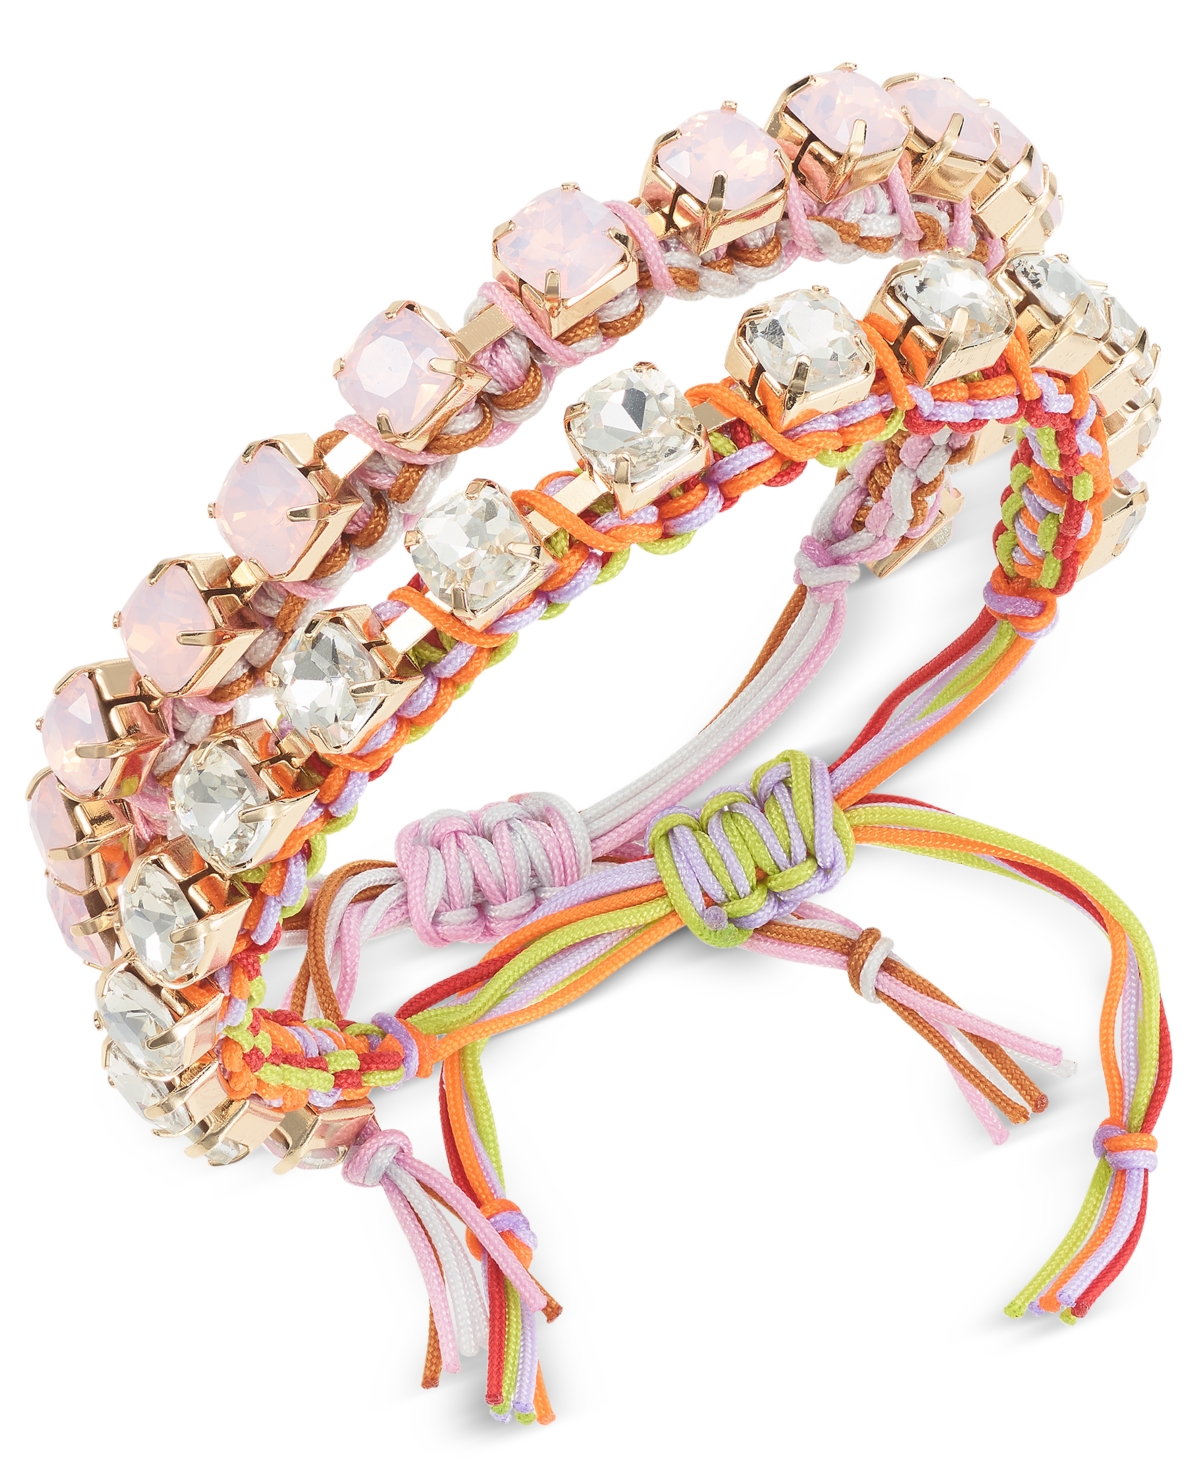 Gold-Tone 2-Pc. Set Color Crystal Cord Slider Bracelets, Created for Macy's - Pink